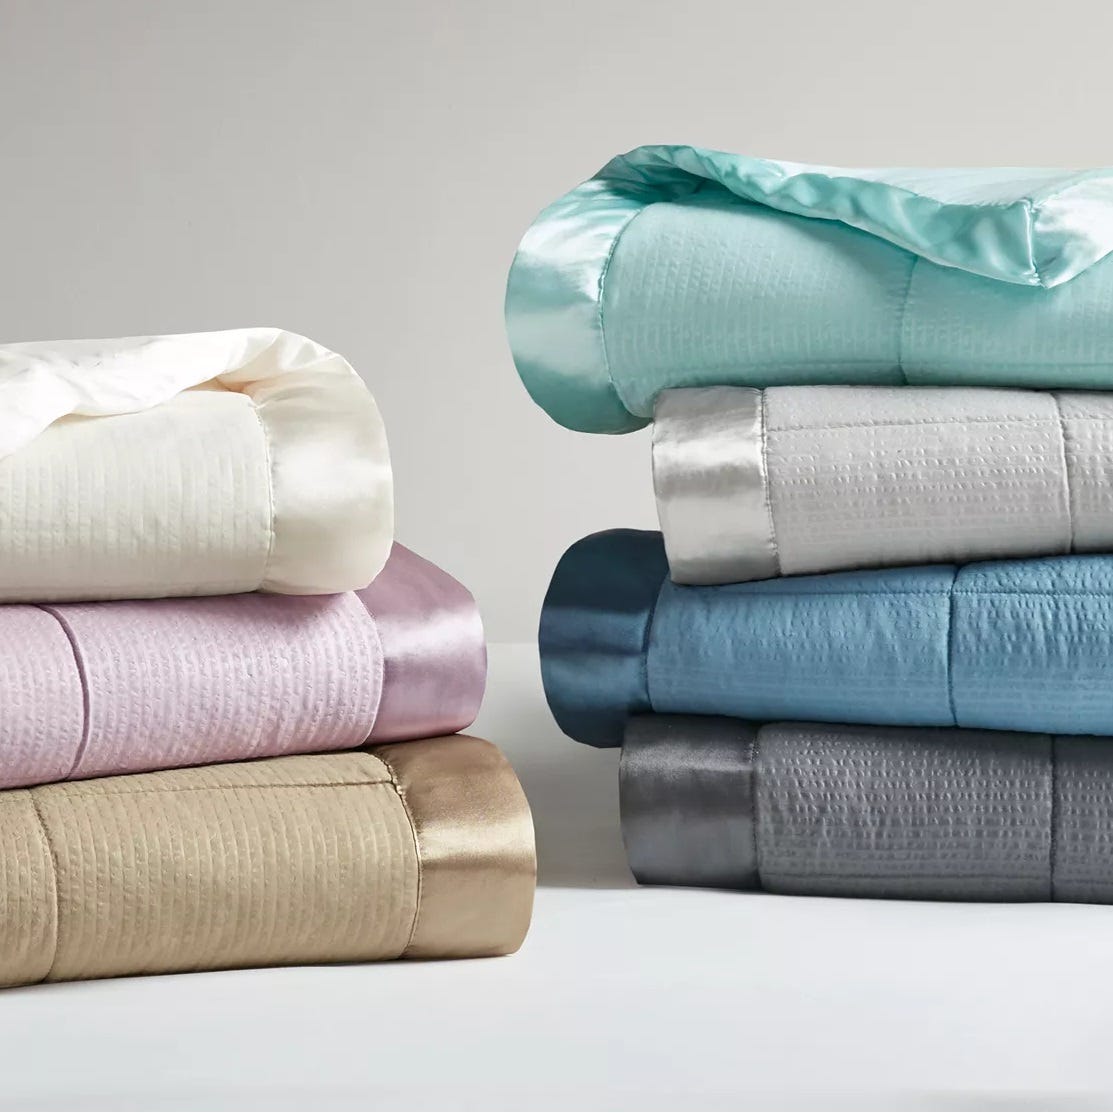 Stacks of folded bed sheets in various colors on a plain background.